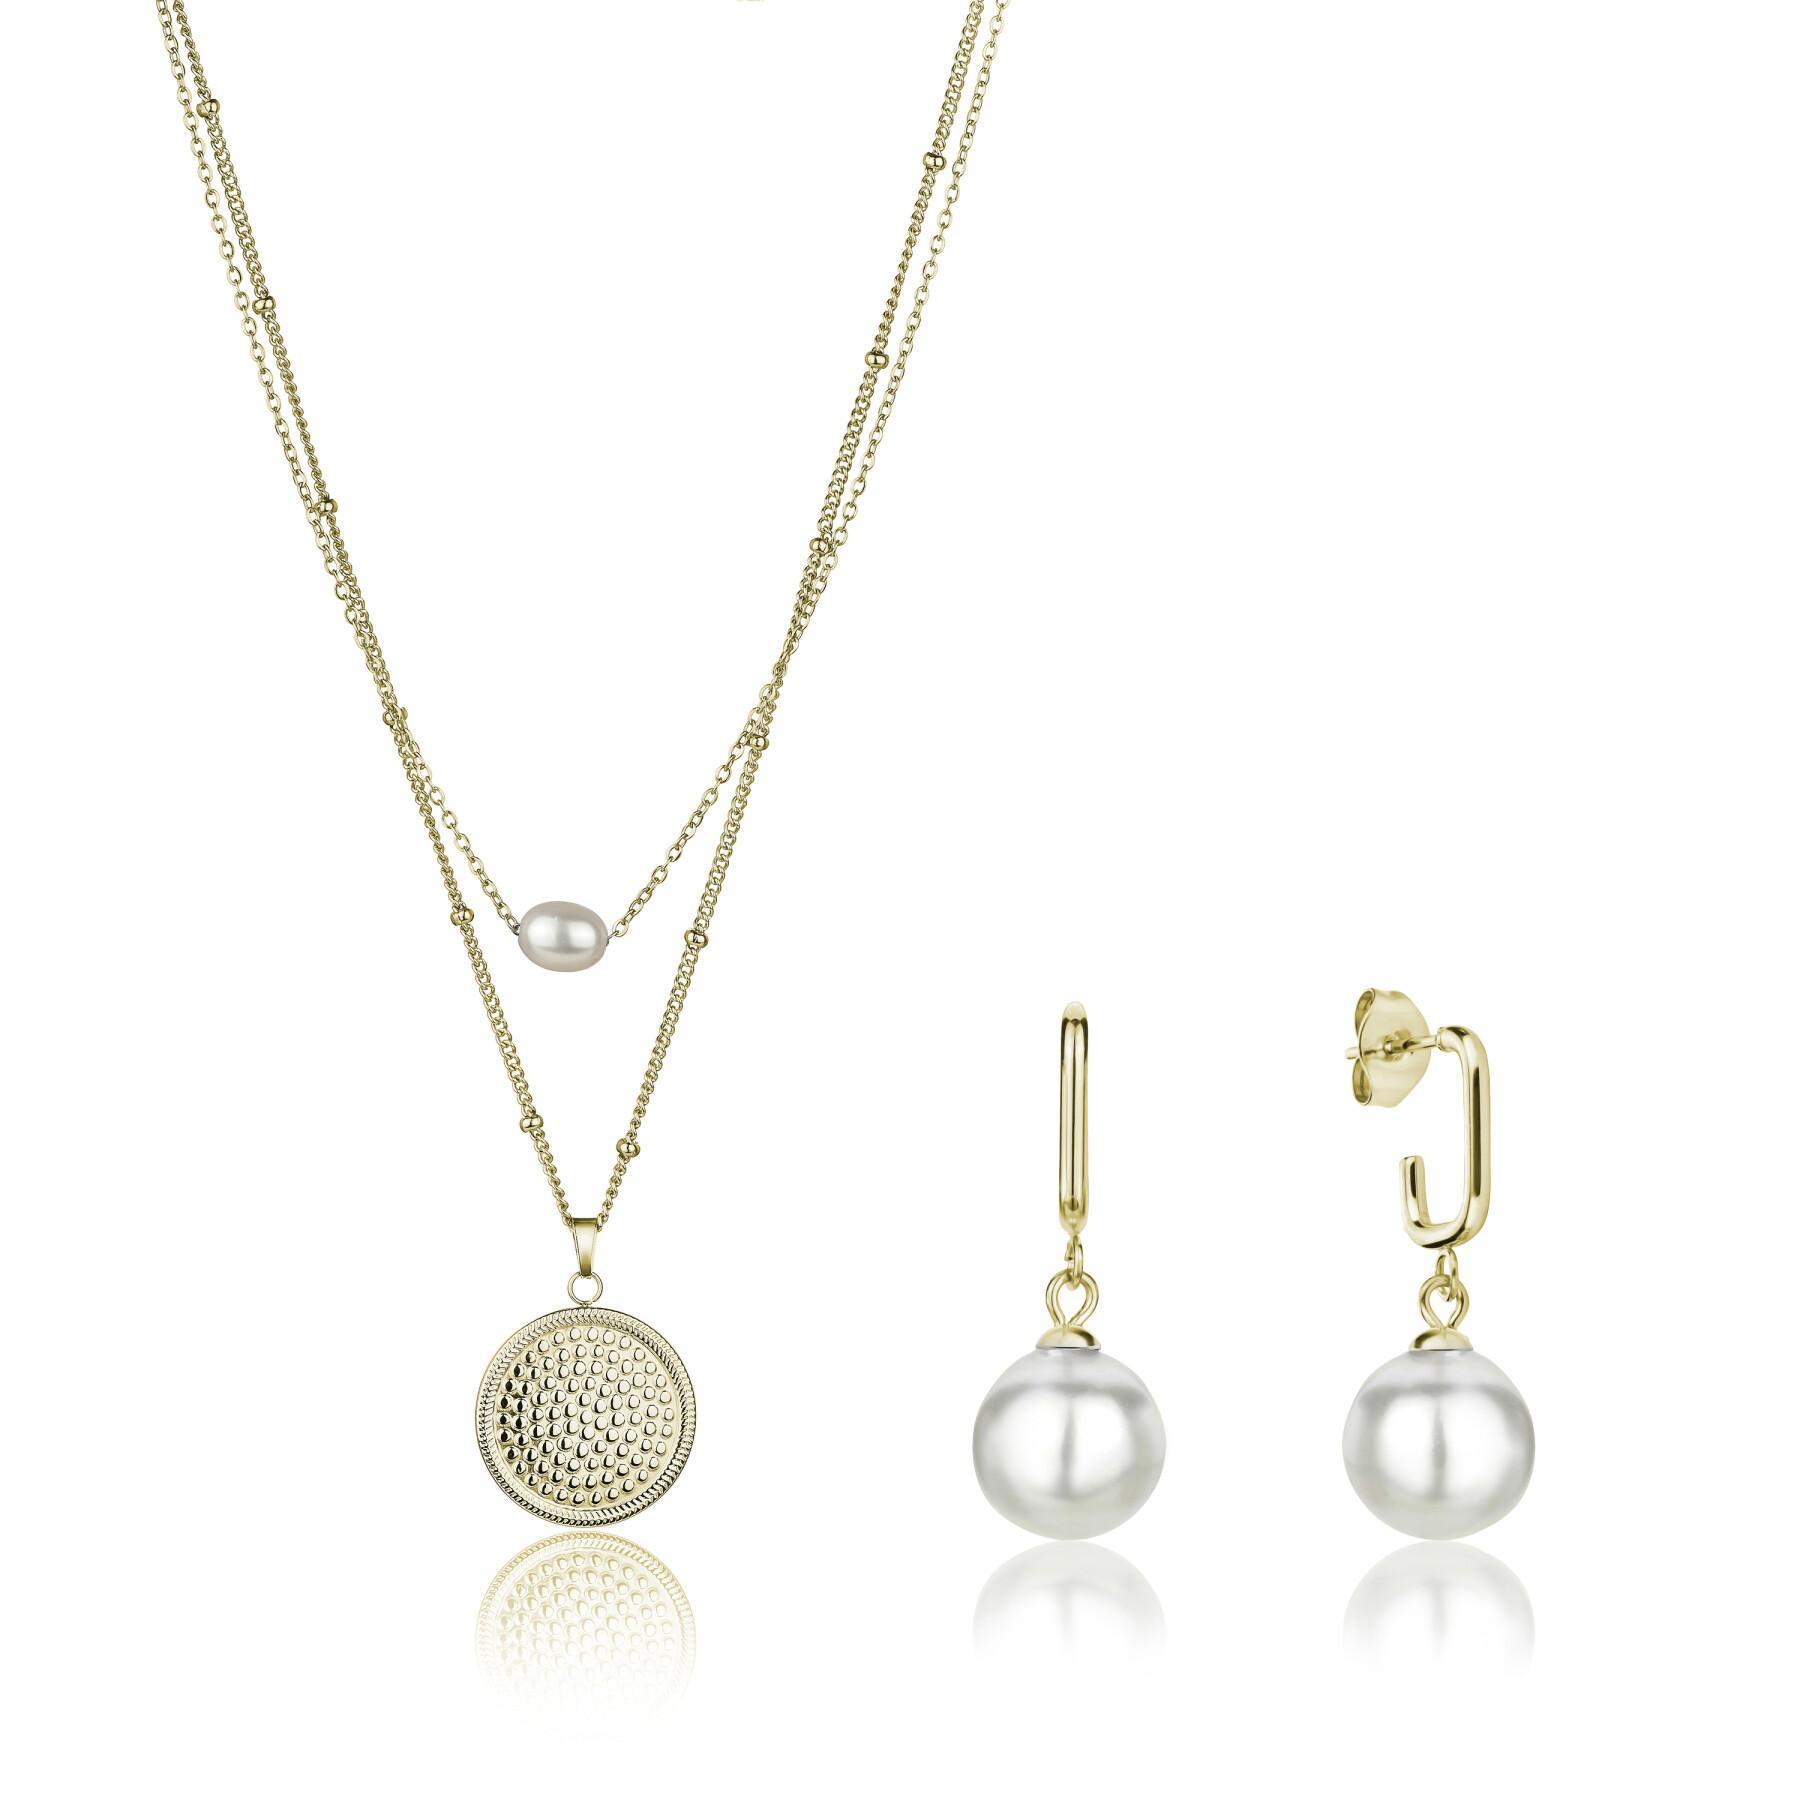 Necklace, bracelet and earrings set Isabella Ford June Pearl